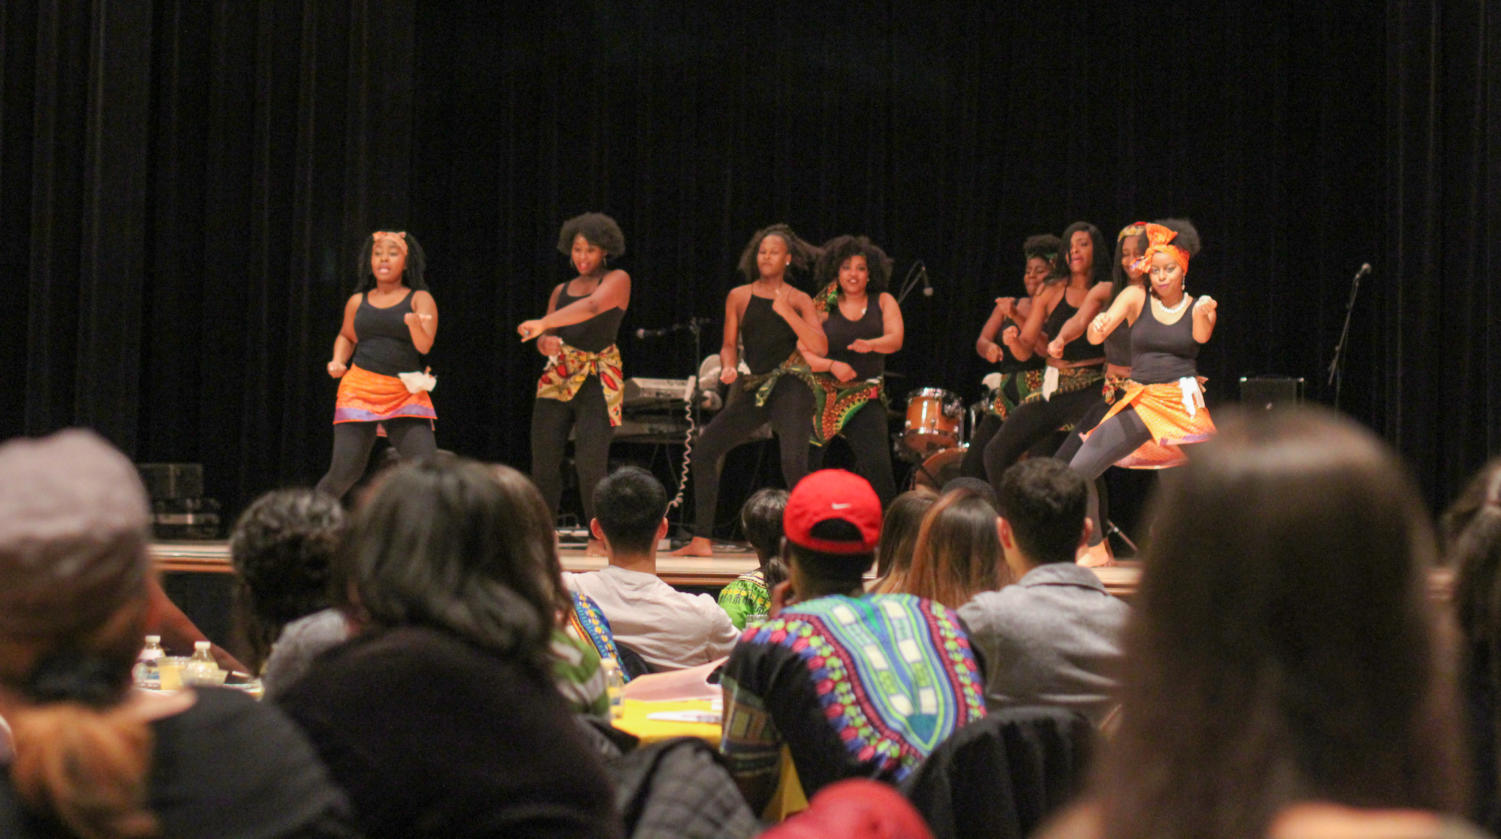 University of Chicago students perform an African and Caribbean inspired dance, choreographed by first-year student, Chika Aniks, and third-year student, Priscilla Daboni at the ACSA Aesthetics Cultural Show.